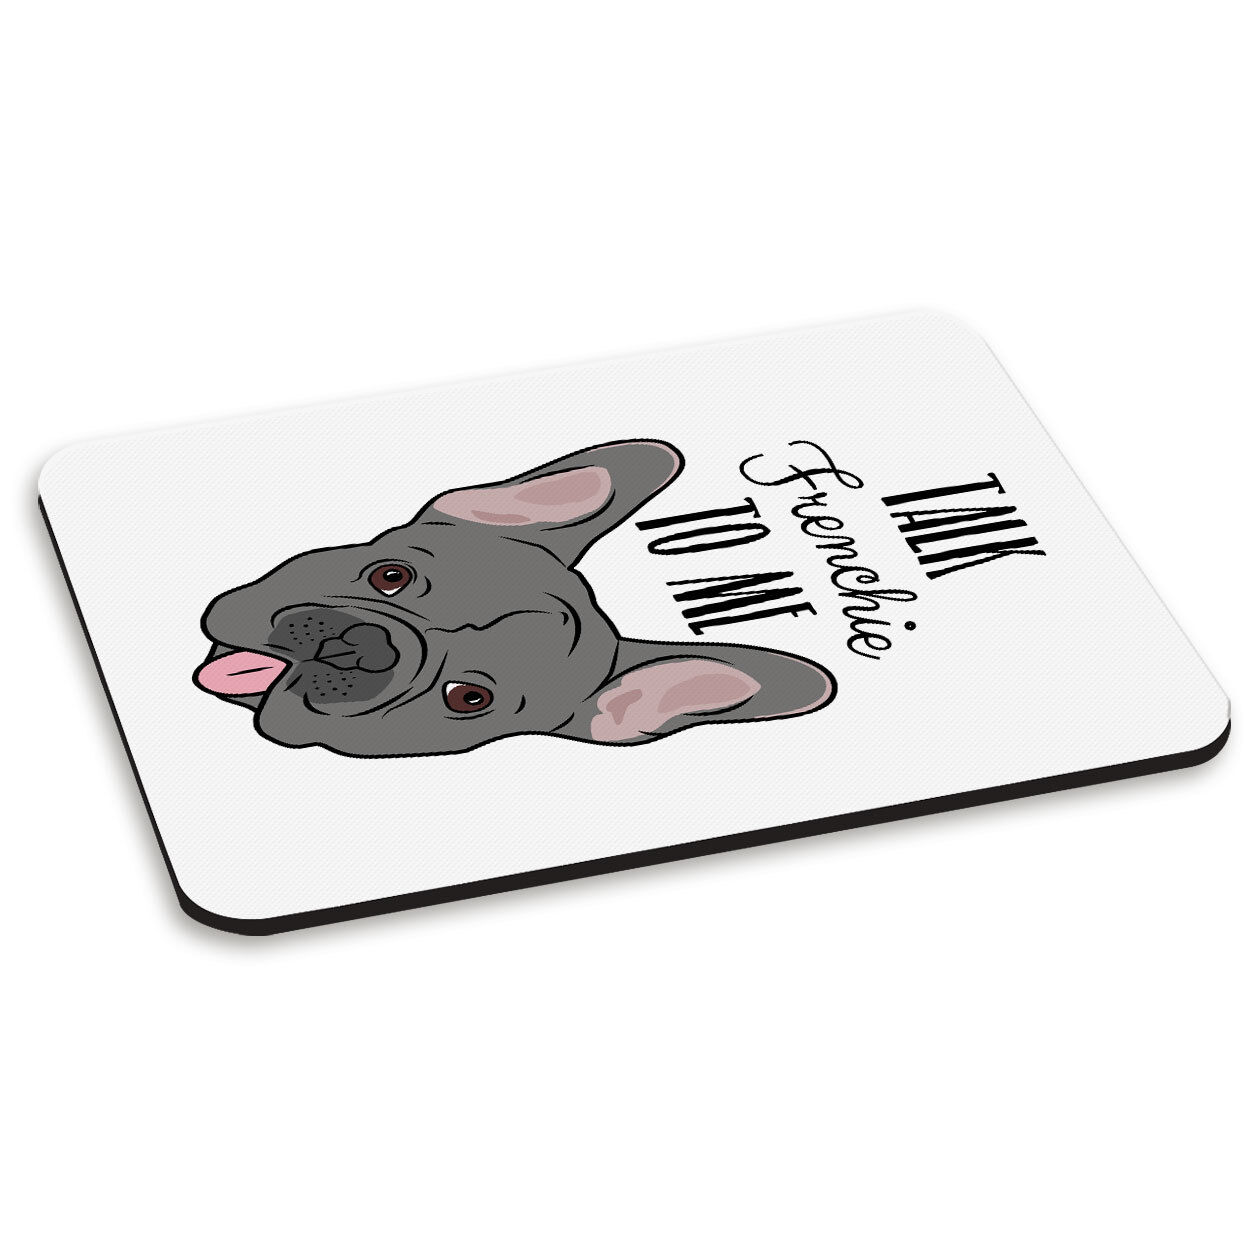 Talk Frenchie To Me French Bulldog PC Computer Mouse Mat Pad - Dog Puppy Funny